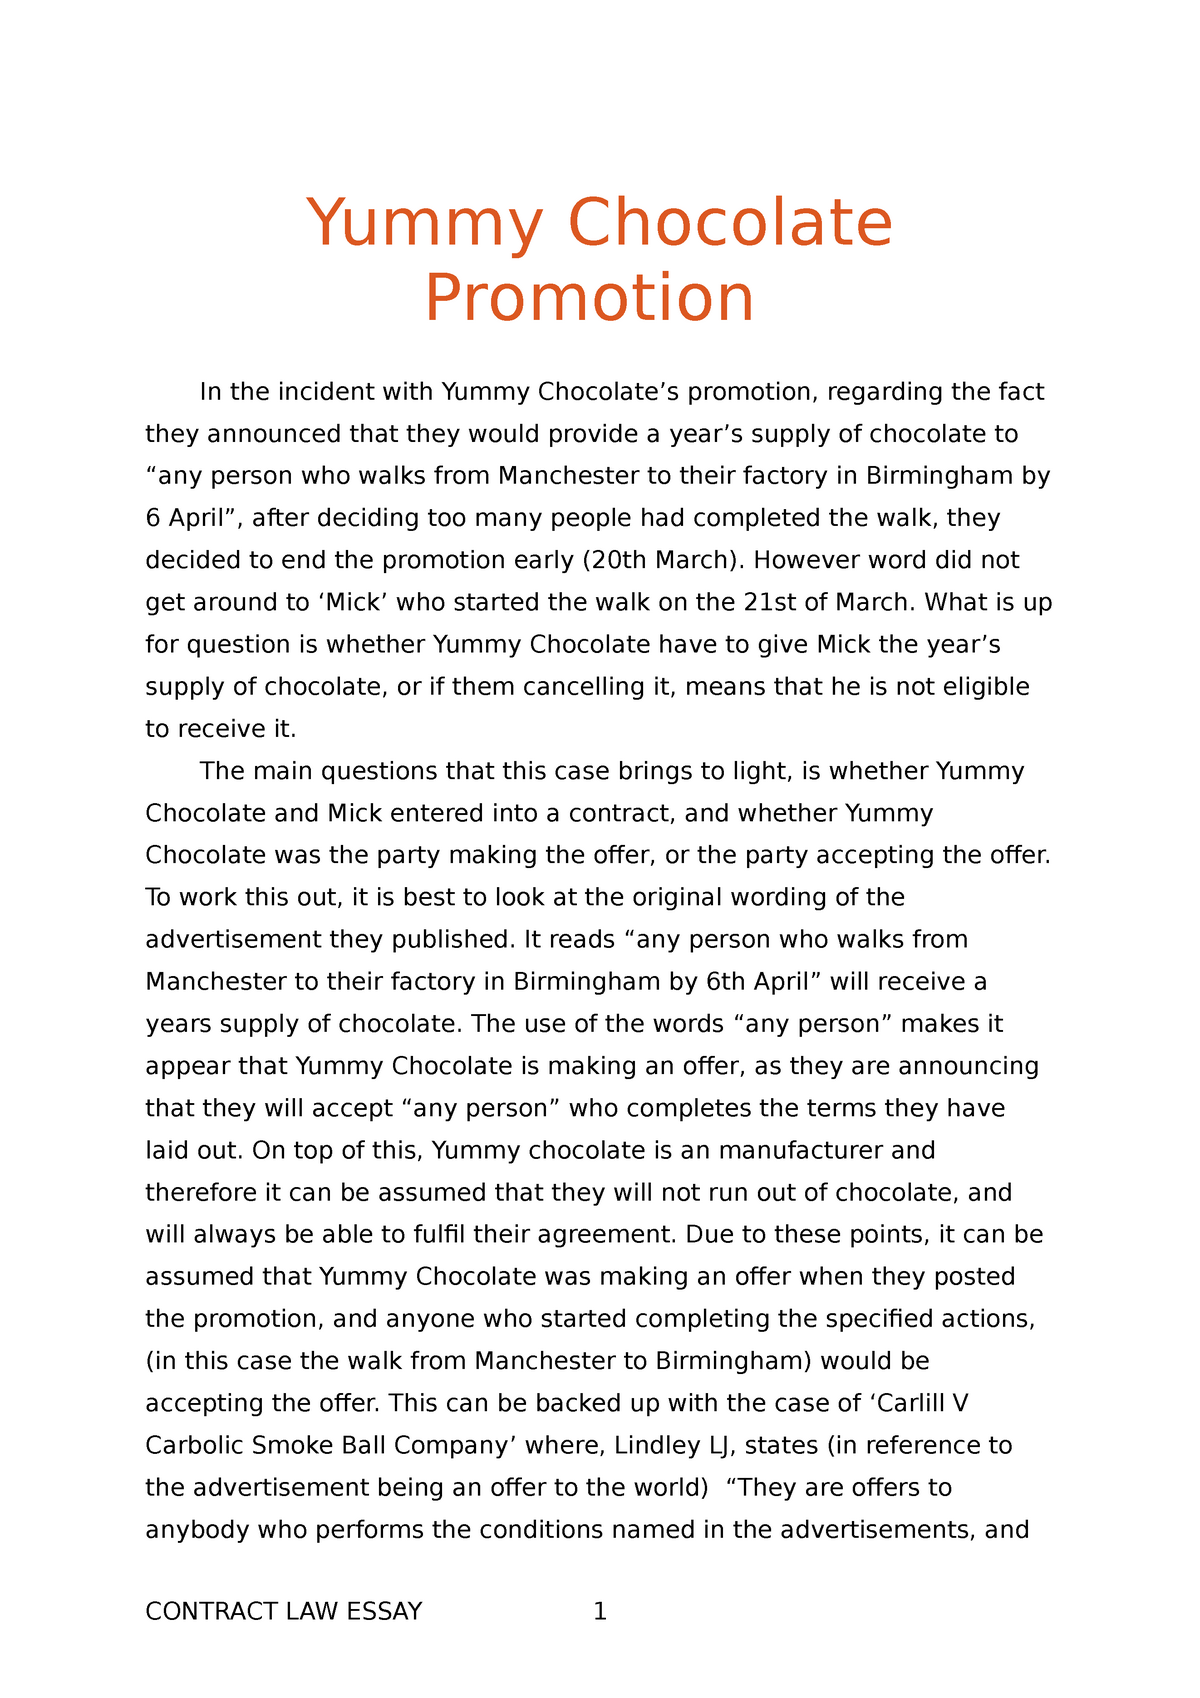 Yummys chocolate practice essay. - Yummy Chocolate Promotion In the ...